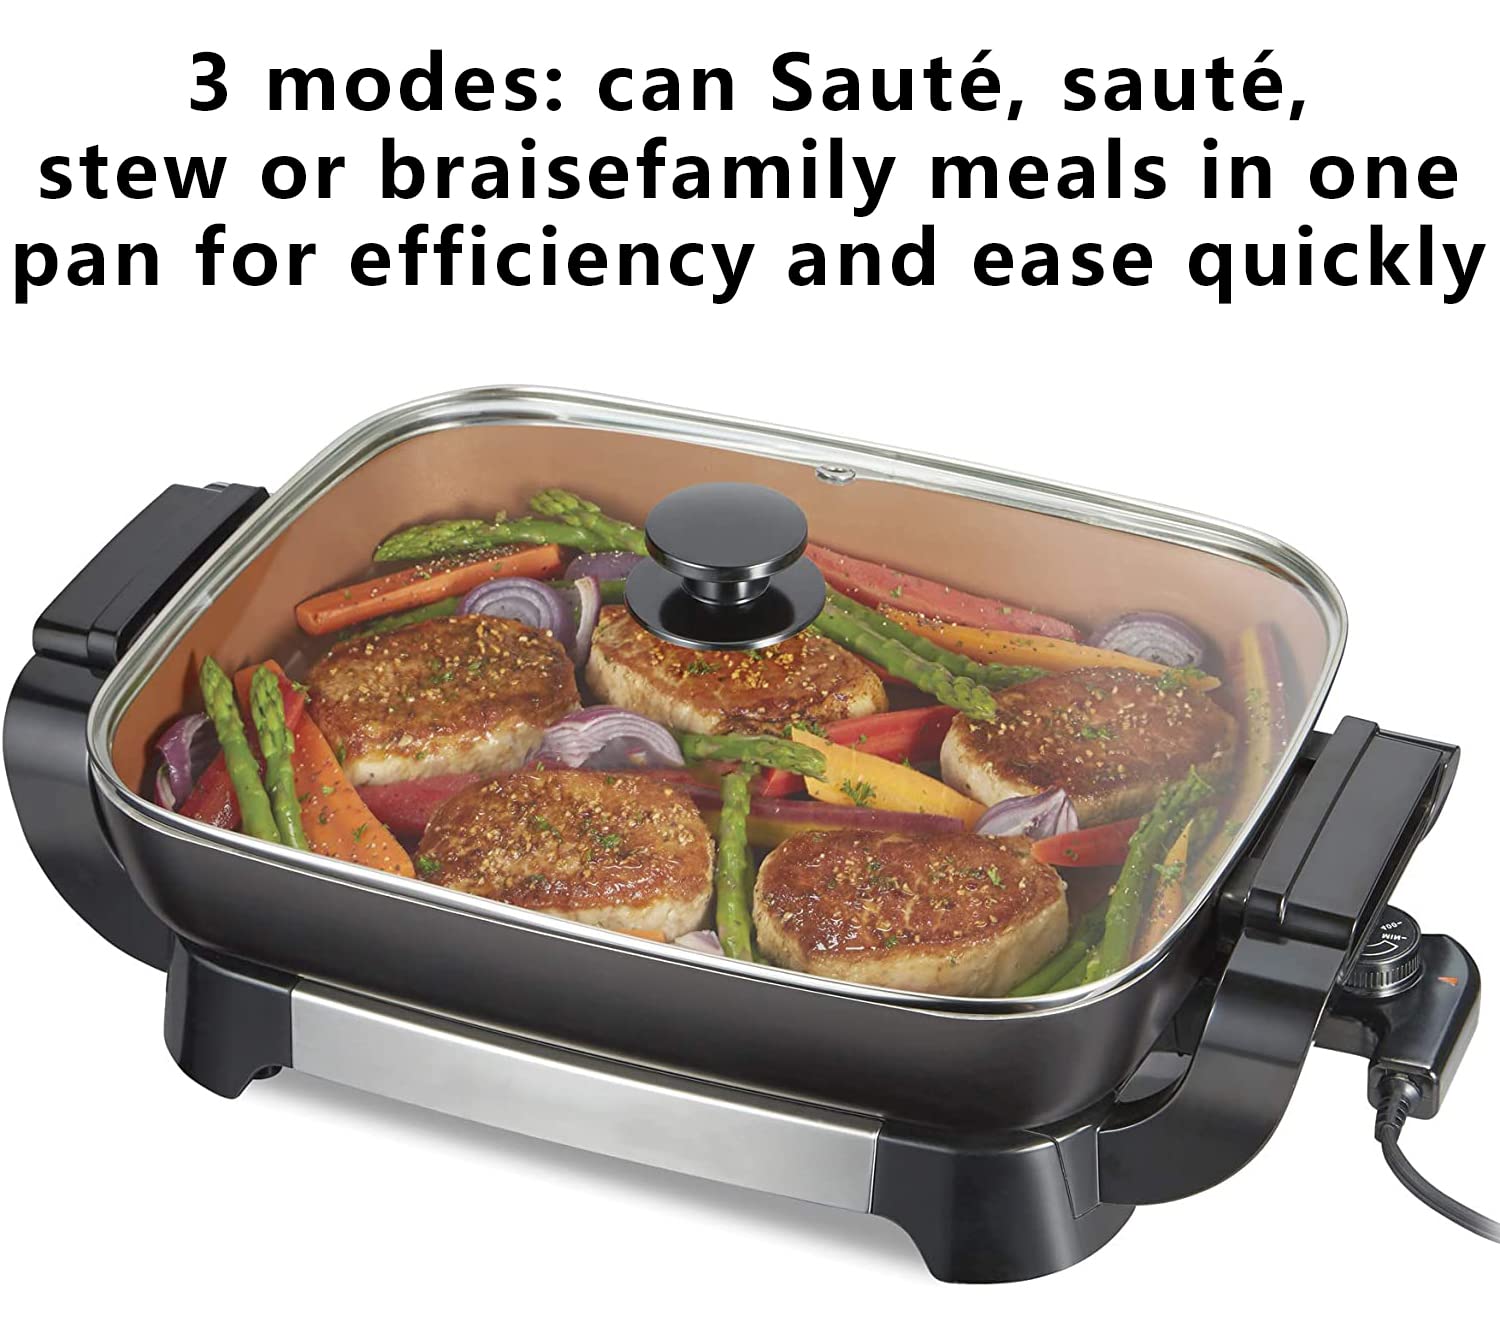 12x15" Nonstick Ceramic Electric Skillet - with Removable Pan, Adjustable Temperature, Reversible Design